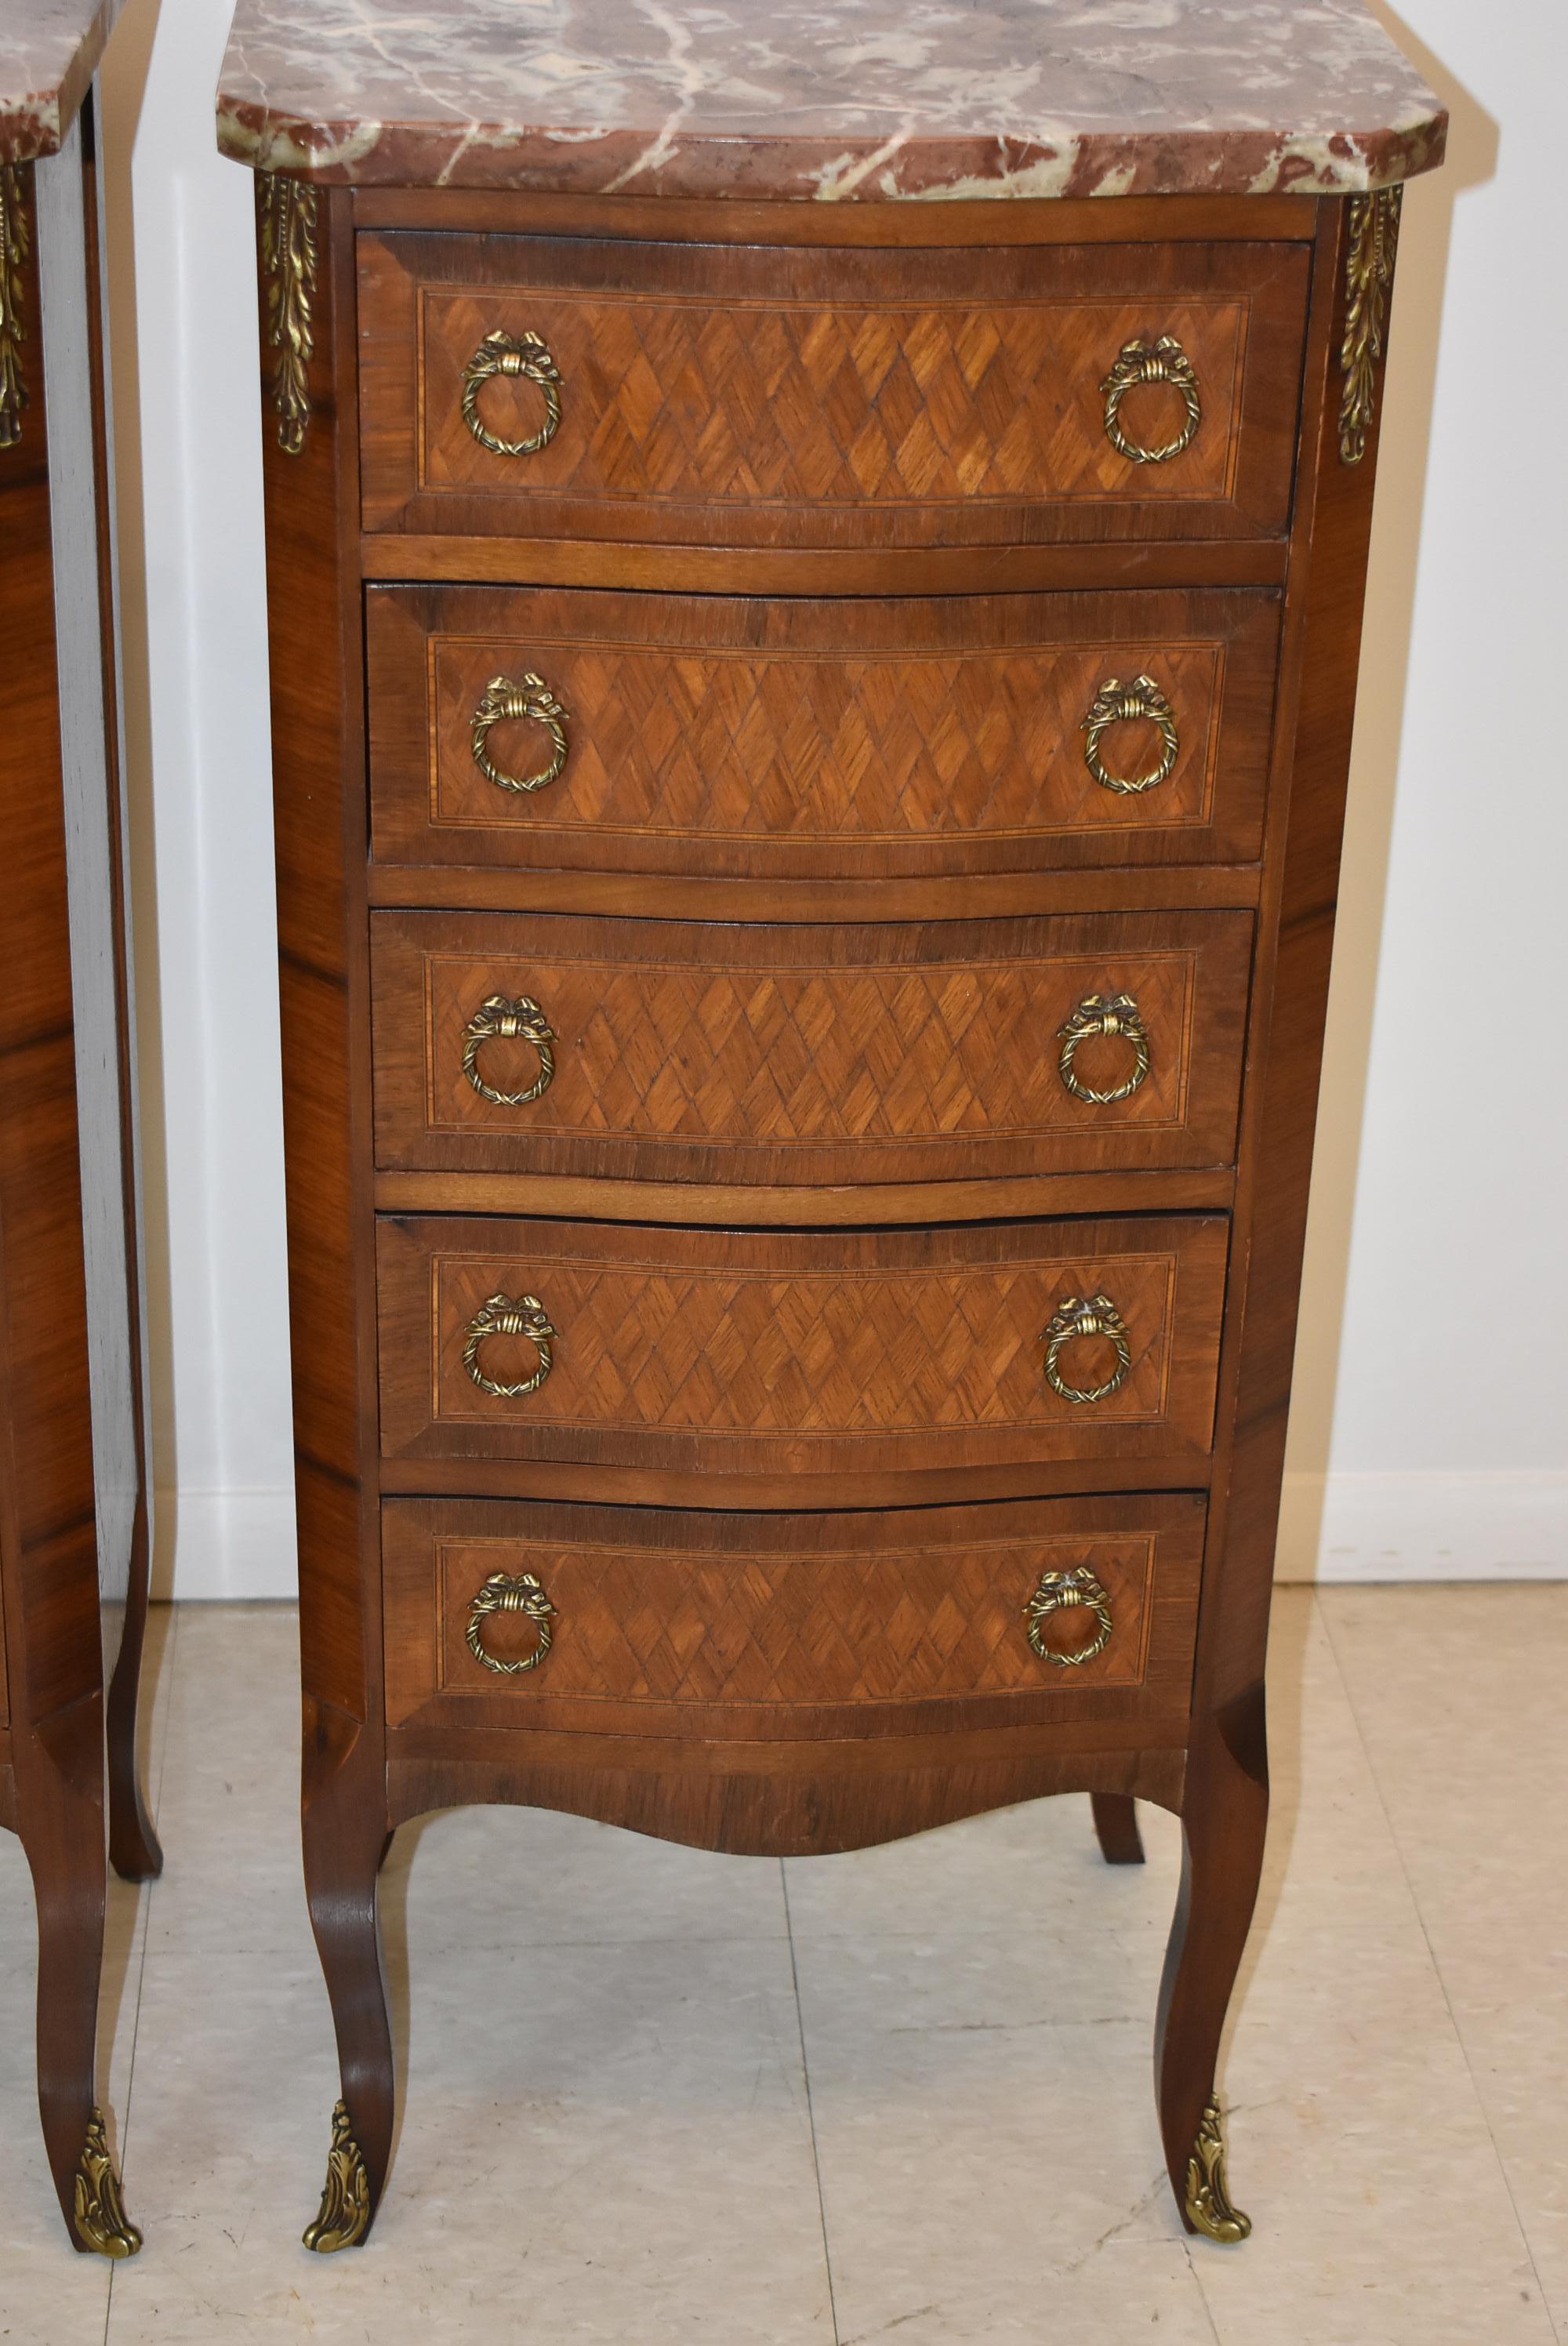 Pair of French style lingerie five drawer walnut chests with marble tops. Diamond pattern inlay woods on the drawer fronts and sides circa 1930s. Brass wreath shaped hardware with a bow. Italian marble tops. Dove tail drawer construction.